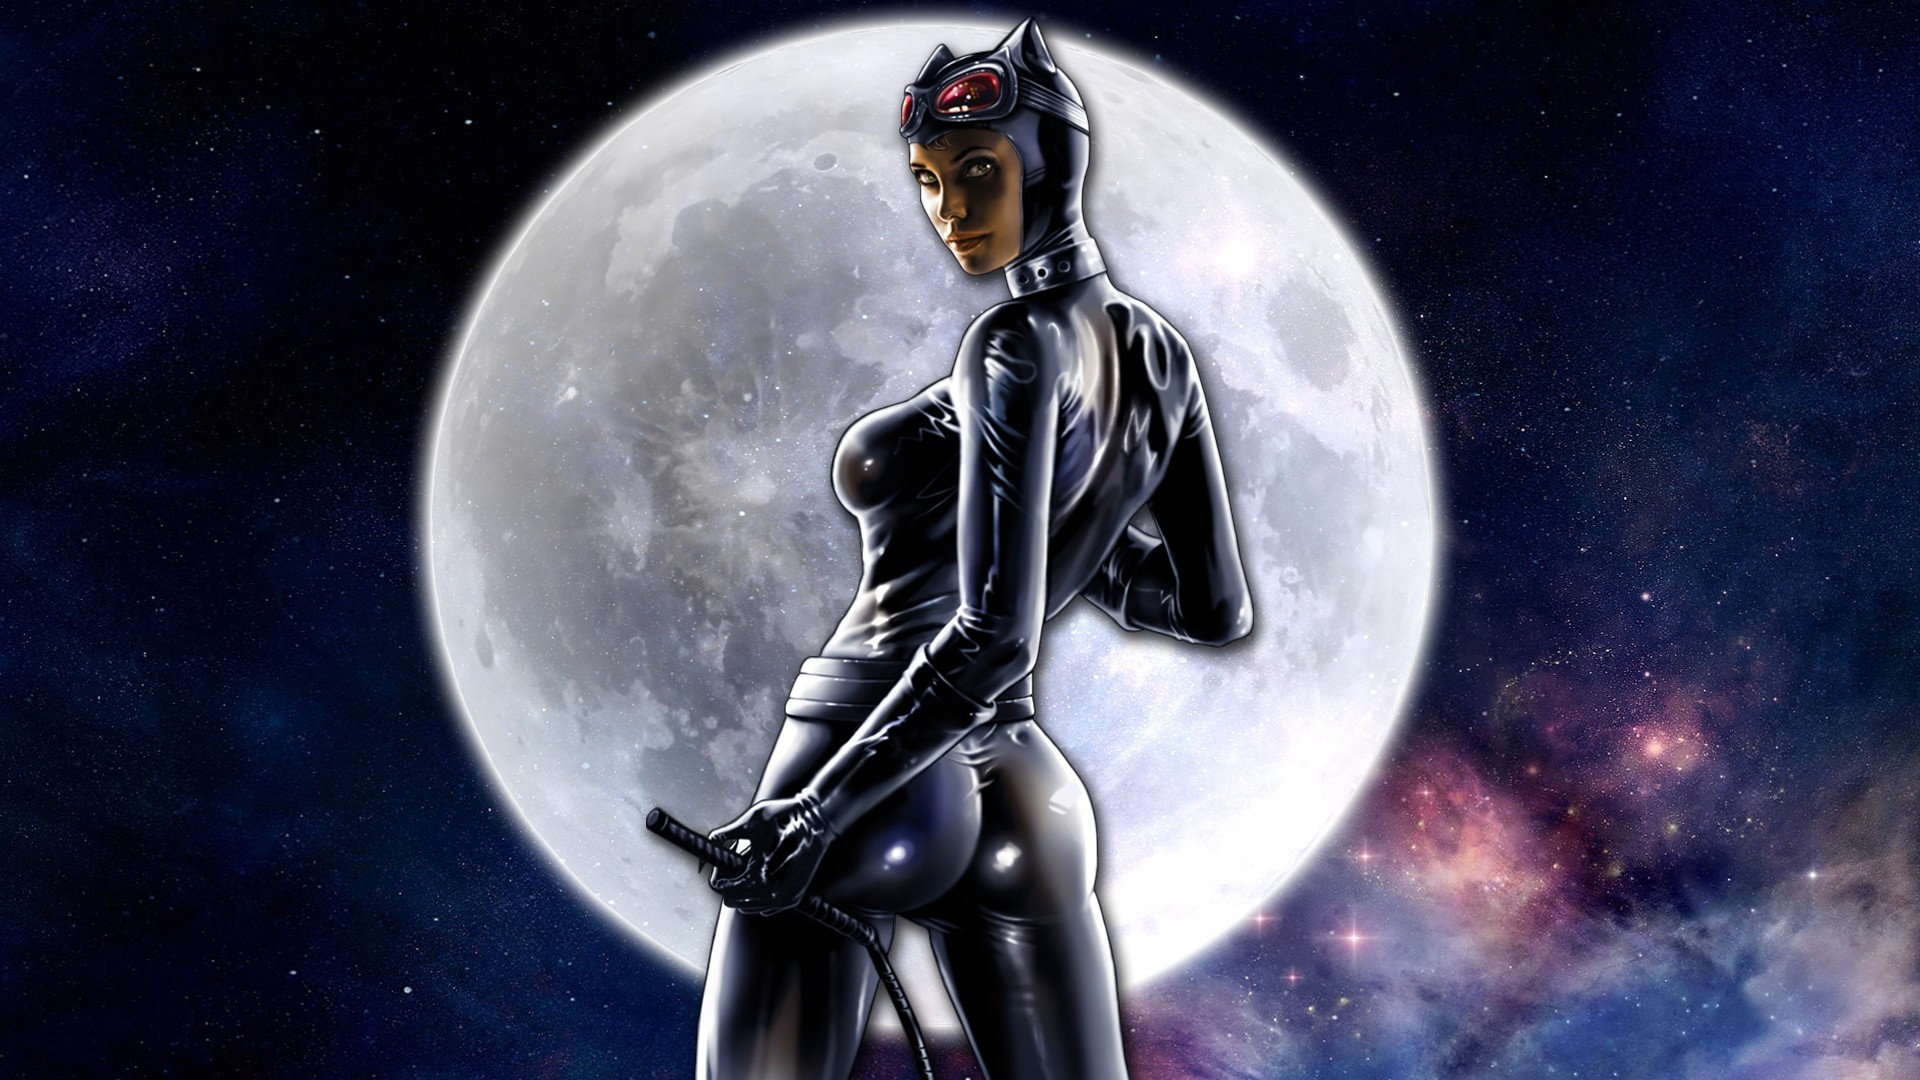 1920x1080 Catwoman high definition wallpapers Â· Catwoman photos